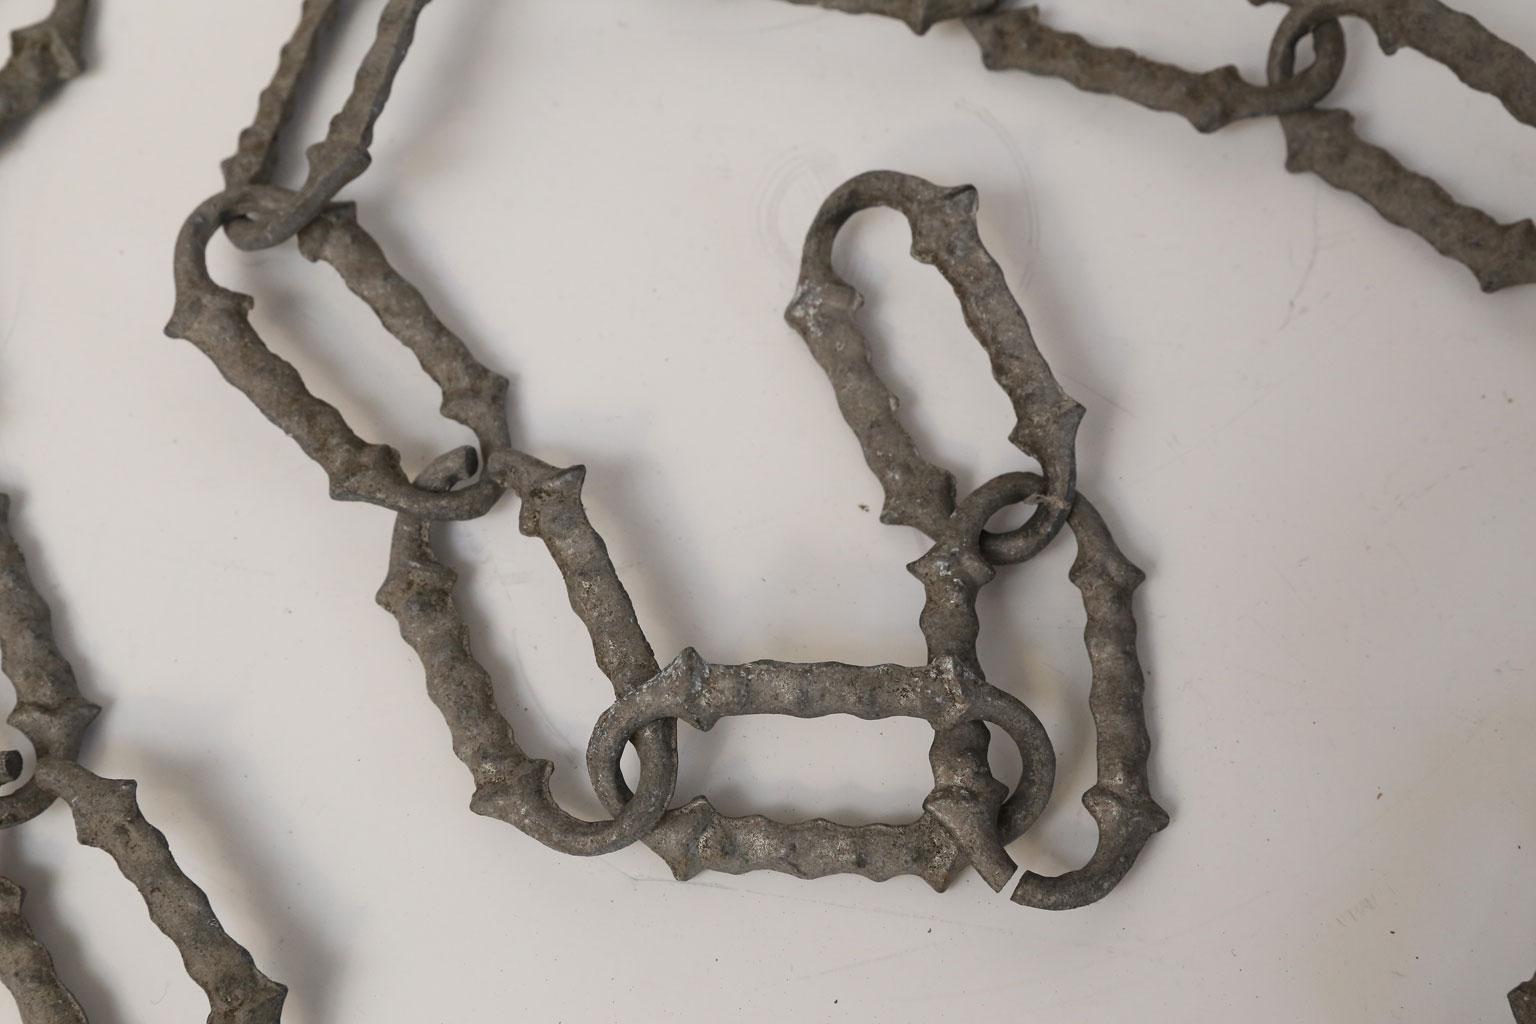 Rare 1920s decorative aluminum chain: three sets of continuous linked antique Belgian aluminum chain. Attractive cast links, each link measures 3.5 inches high x 1.88 inches wide x .25 inches deep. Every other link can be opened to adjust length of